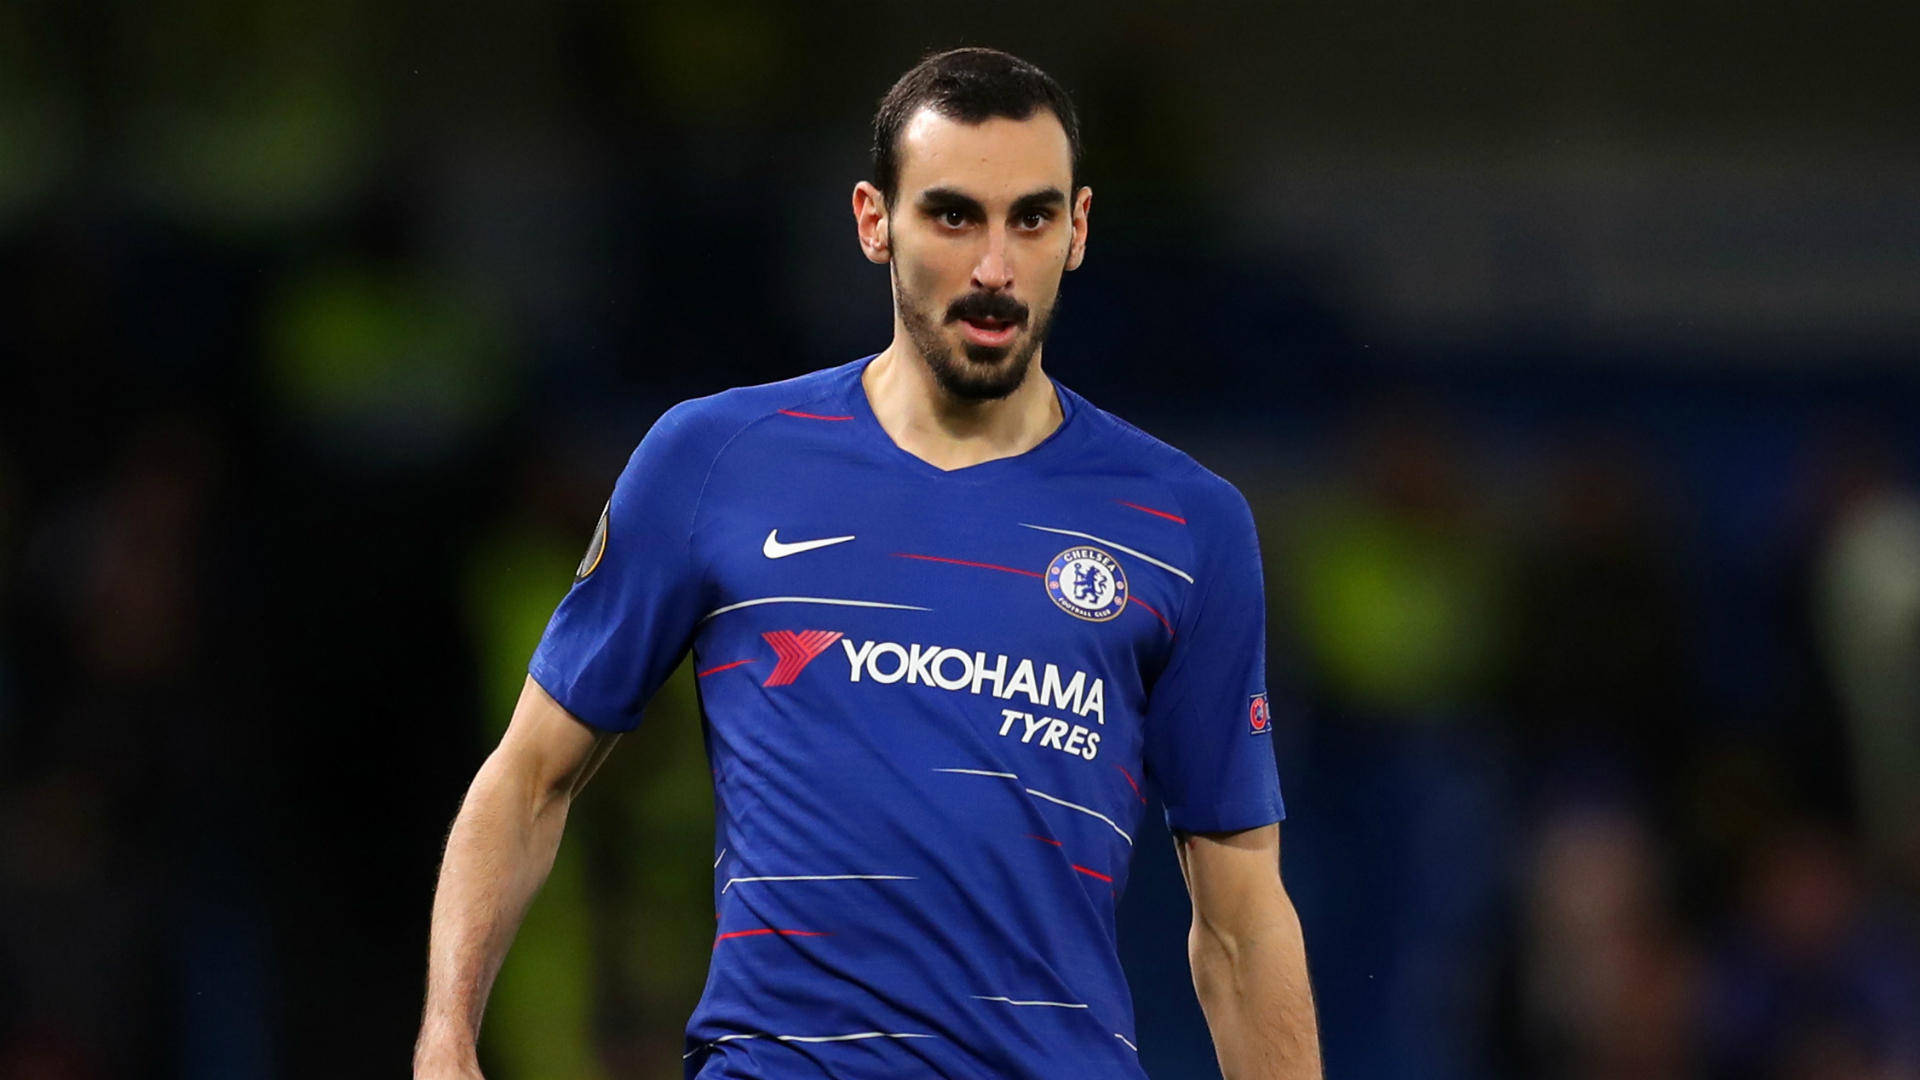 Roma have bolstered their full-back options ahead of the new Serie A season after completing a loan move for Chelsea's Davide Zappacosta.